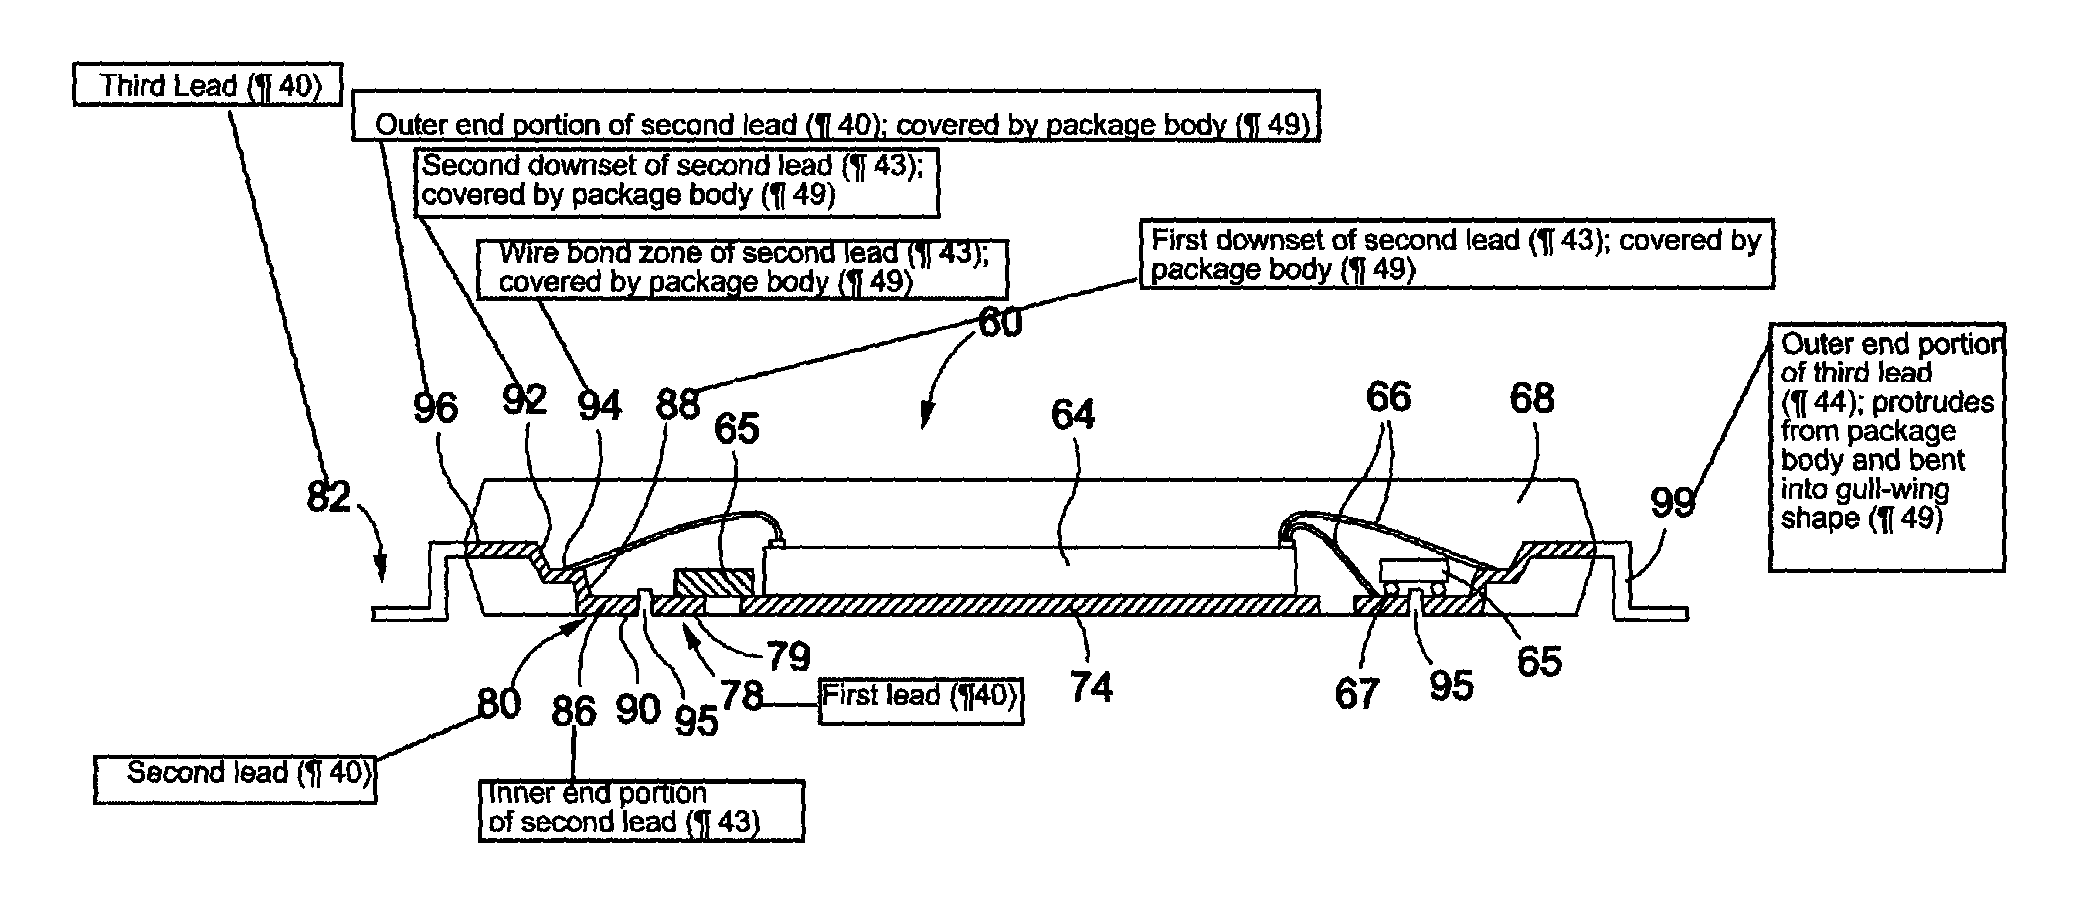 Semiconductor device with increased I/O leadframe including passive device